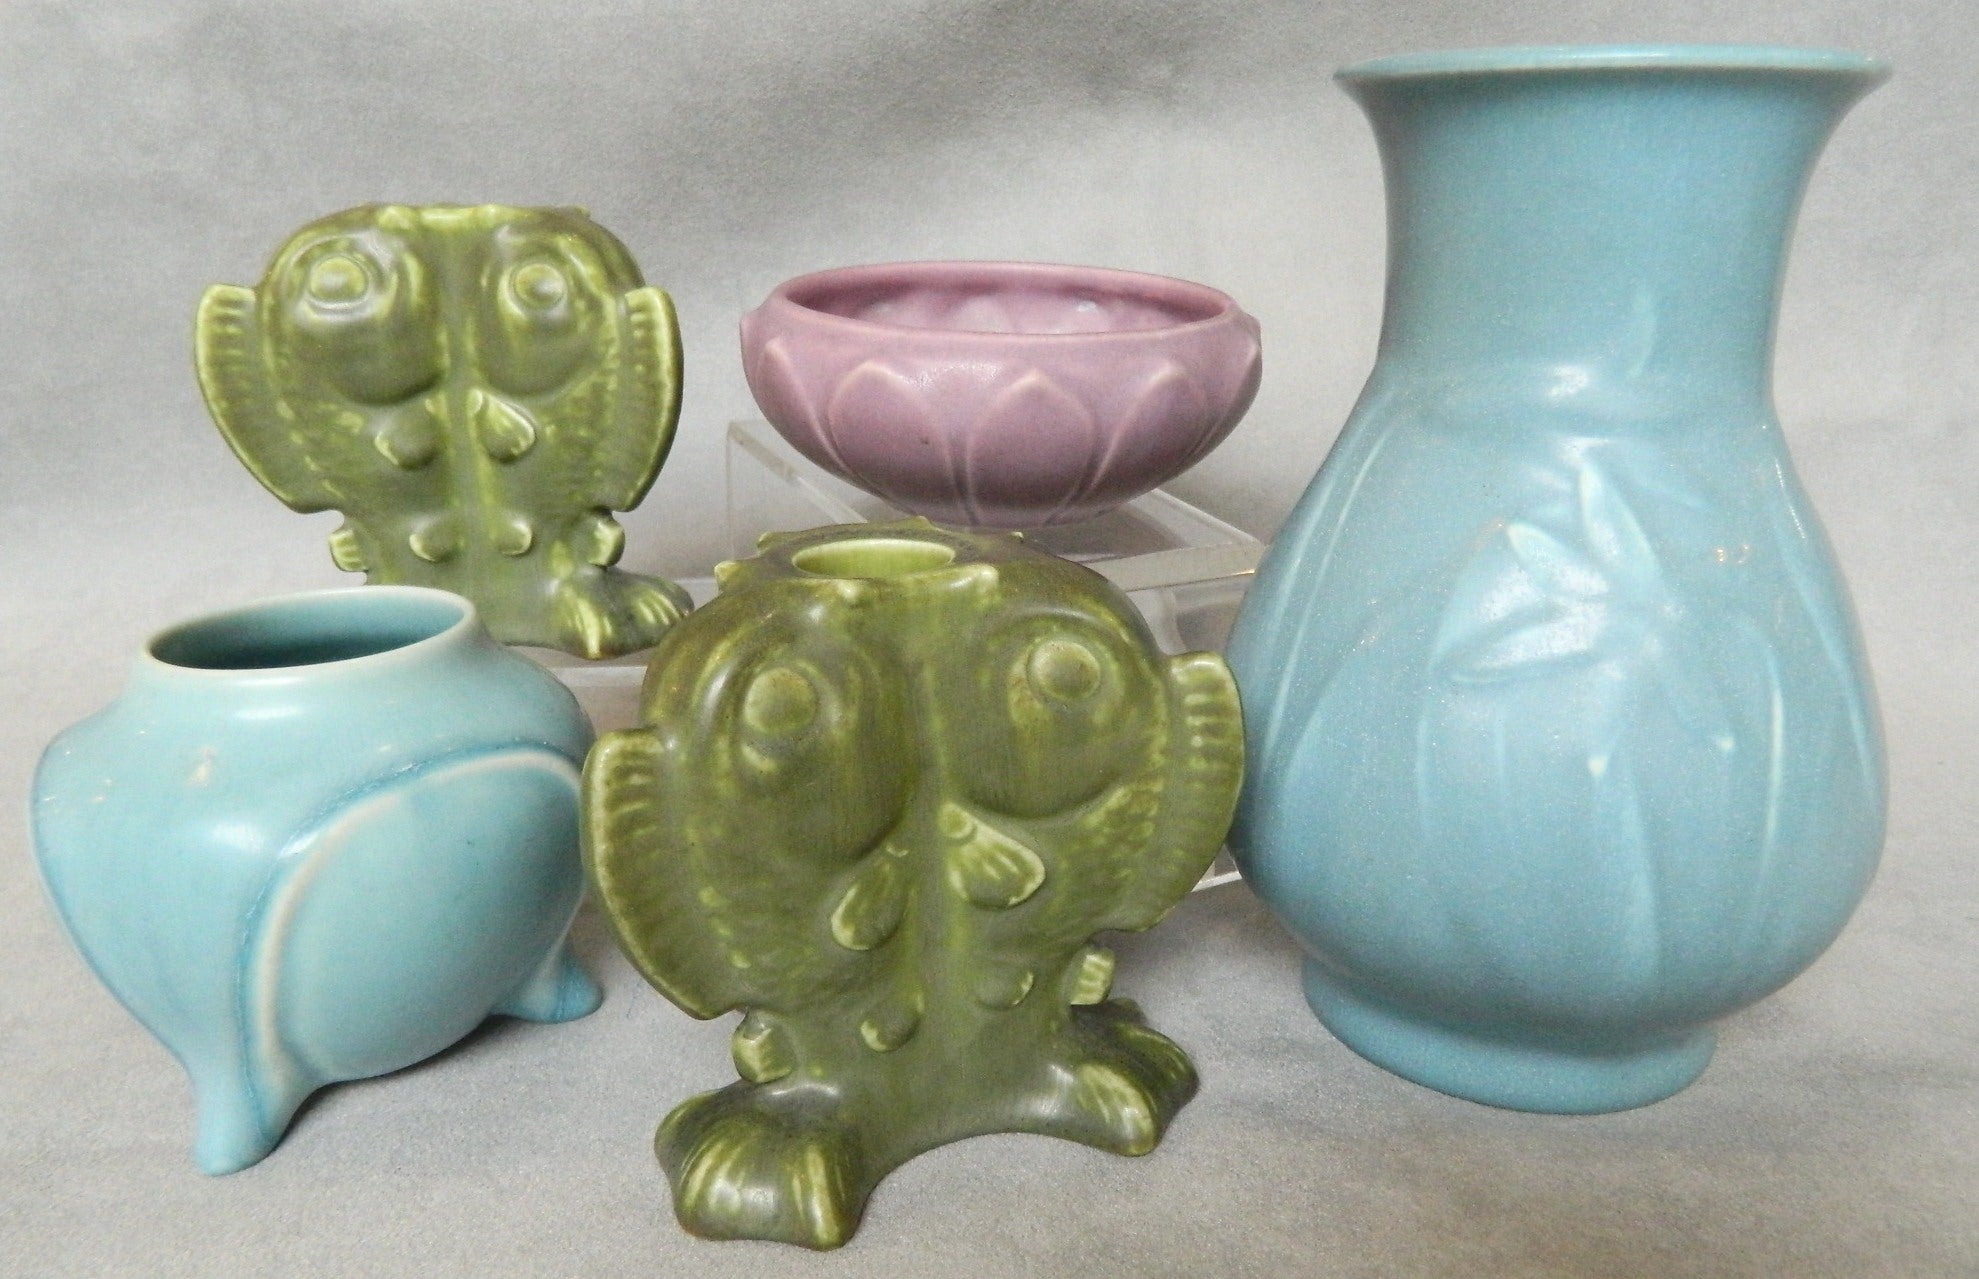 Group of Rookwood Pottery